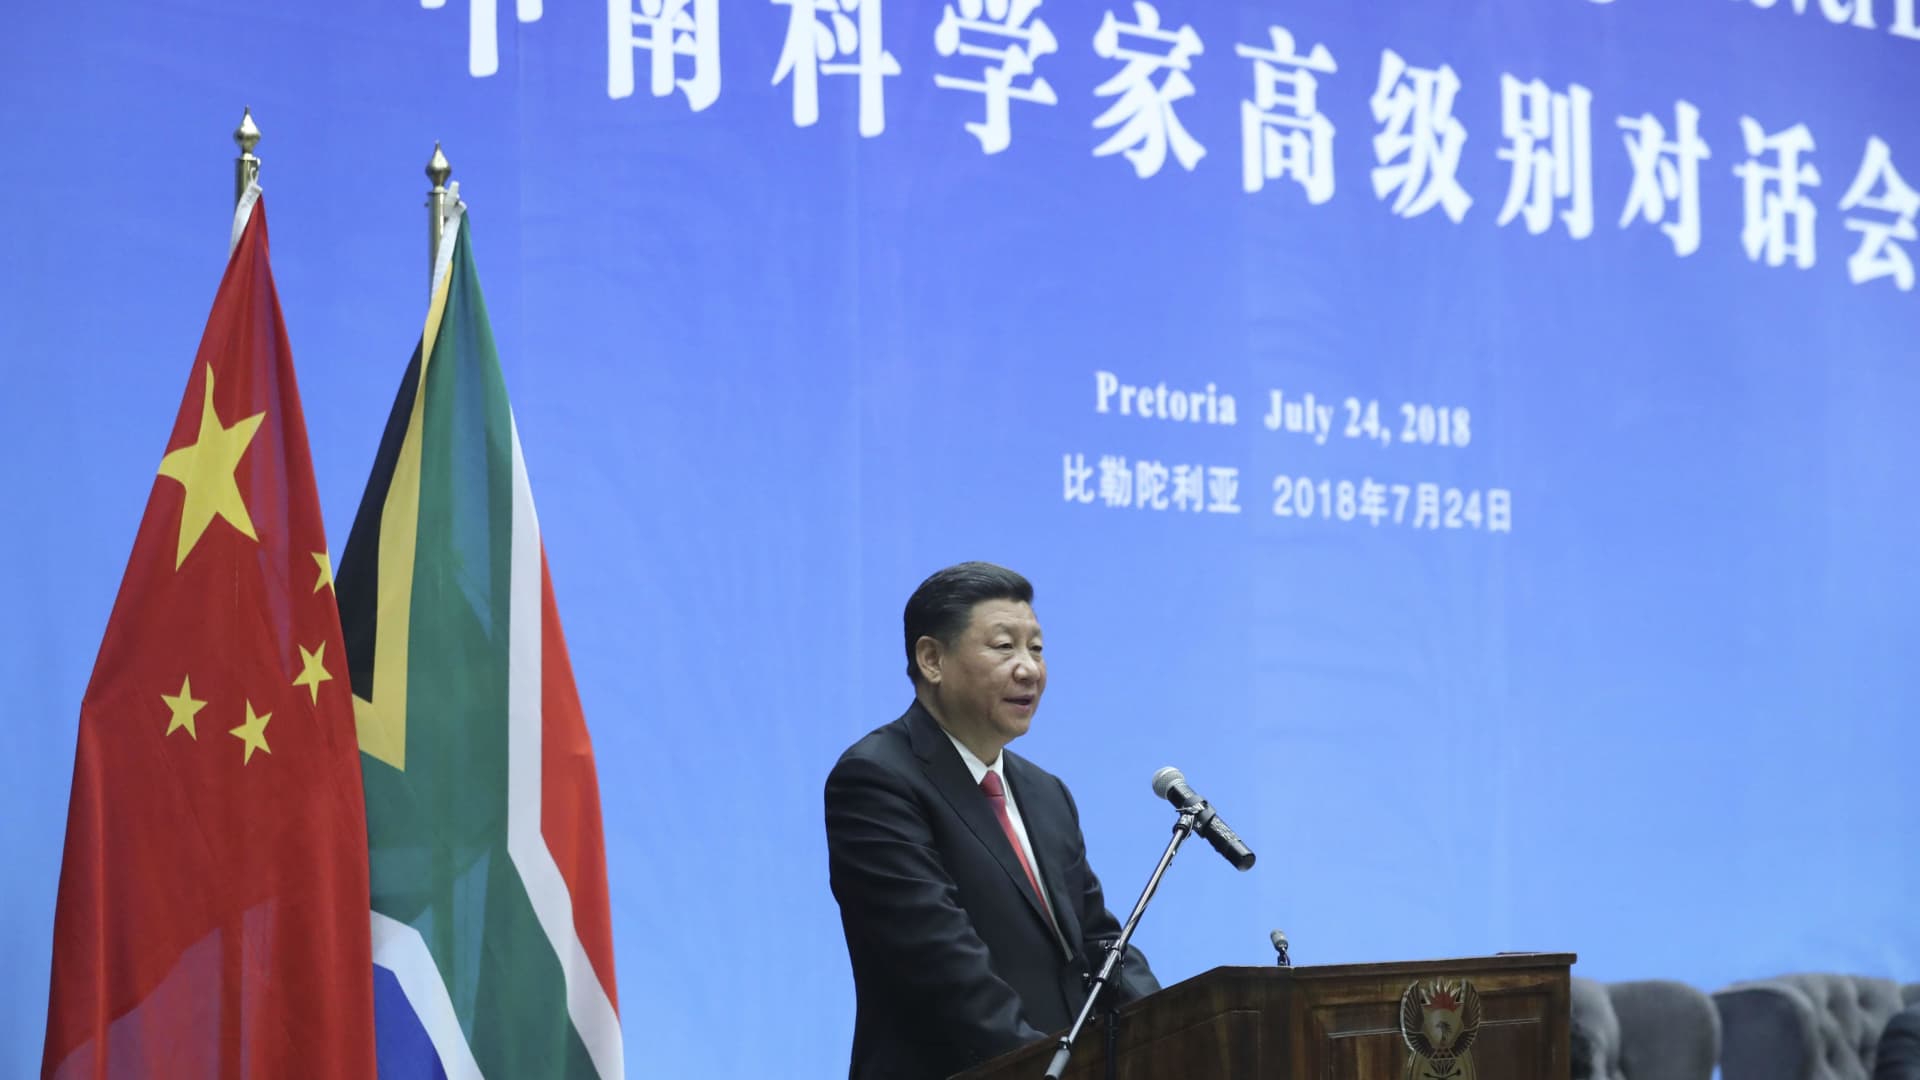 Chinese President Xi Jinping and South African President Cyril Ramaphosa (not pictured) deliver a speech at the opening ceremony of South Africa-China Scientists High Level Dialogue between the two countries' scientists on July 24, 2018, in Pretoria, South Africa.